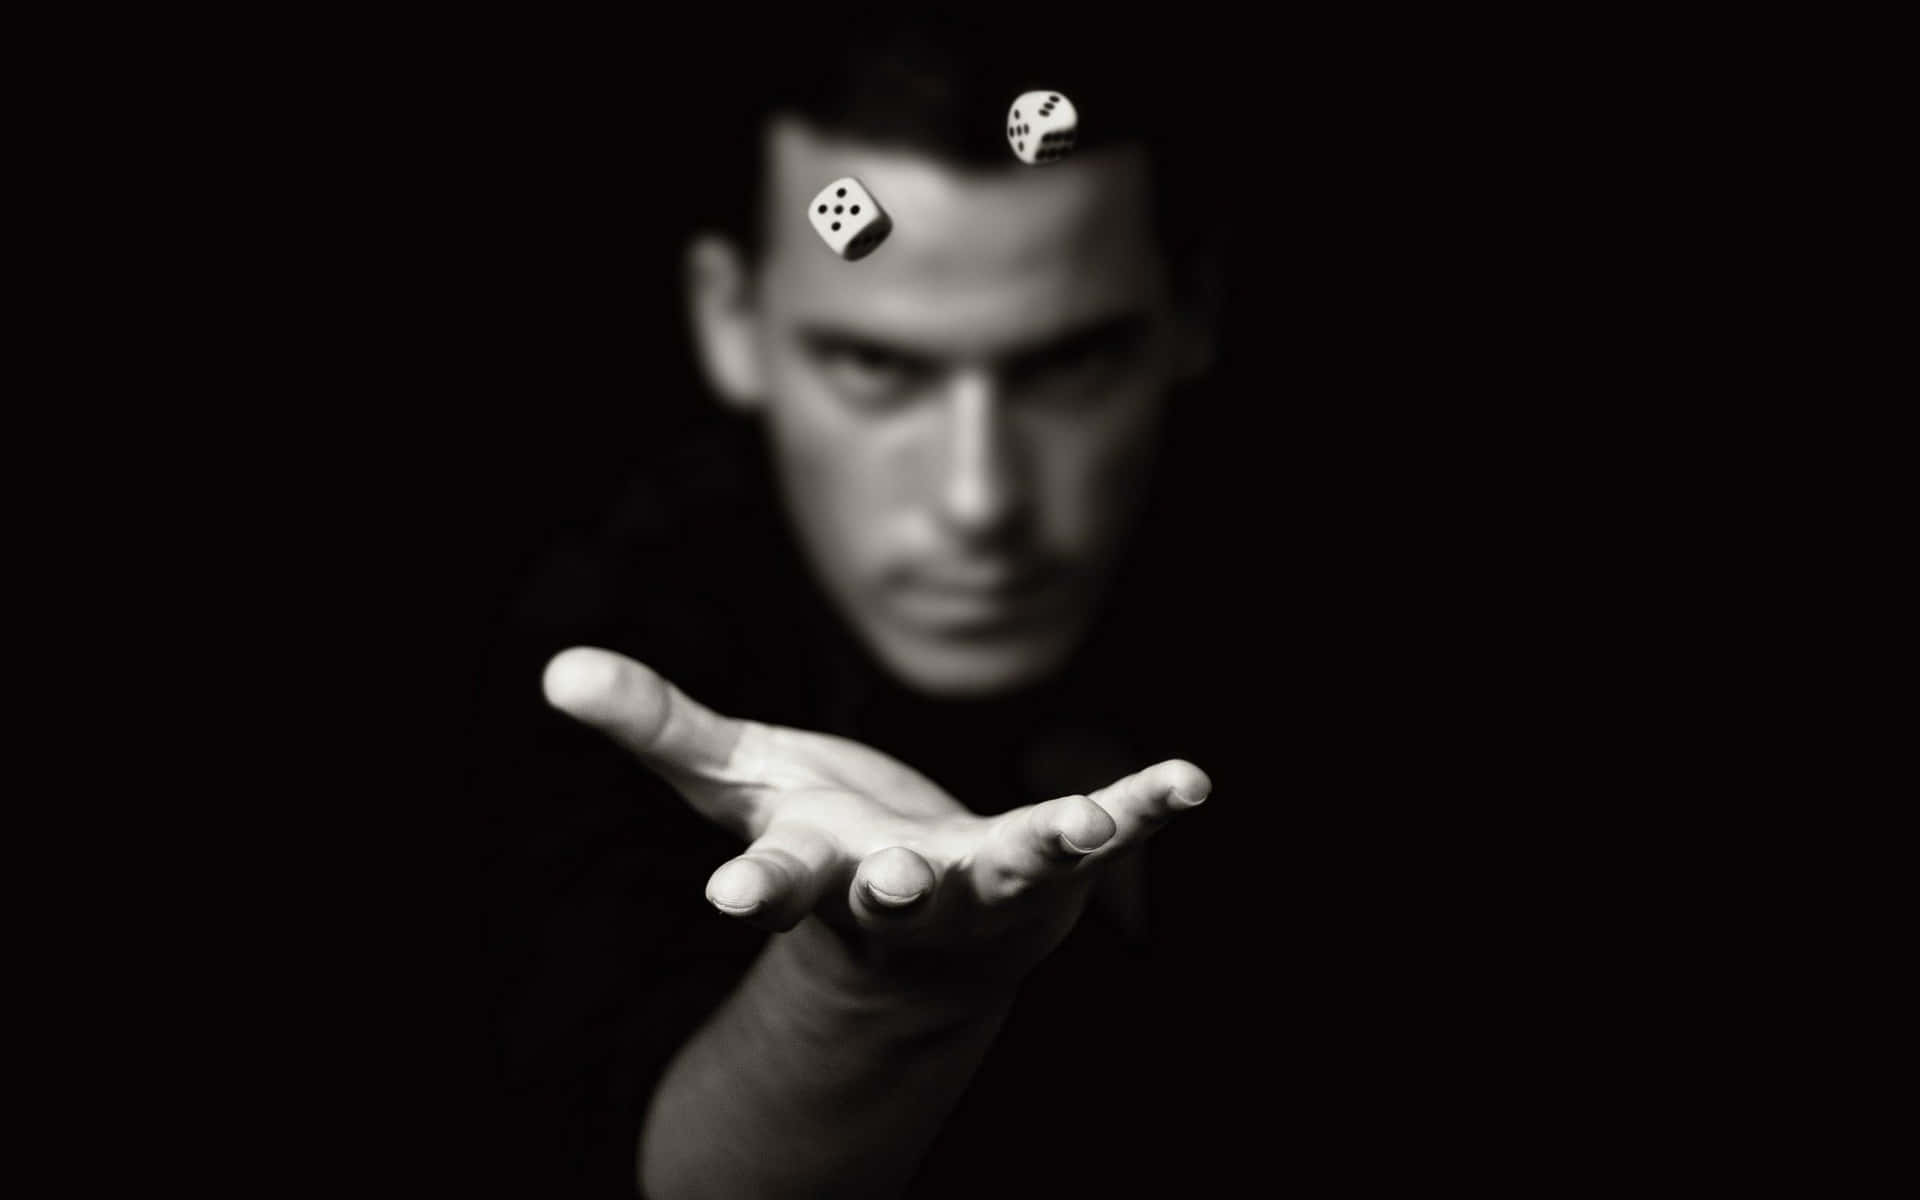 Man Tossing Dice Blackand White Background